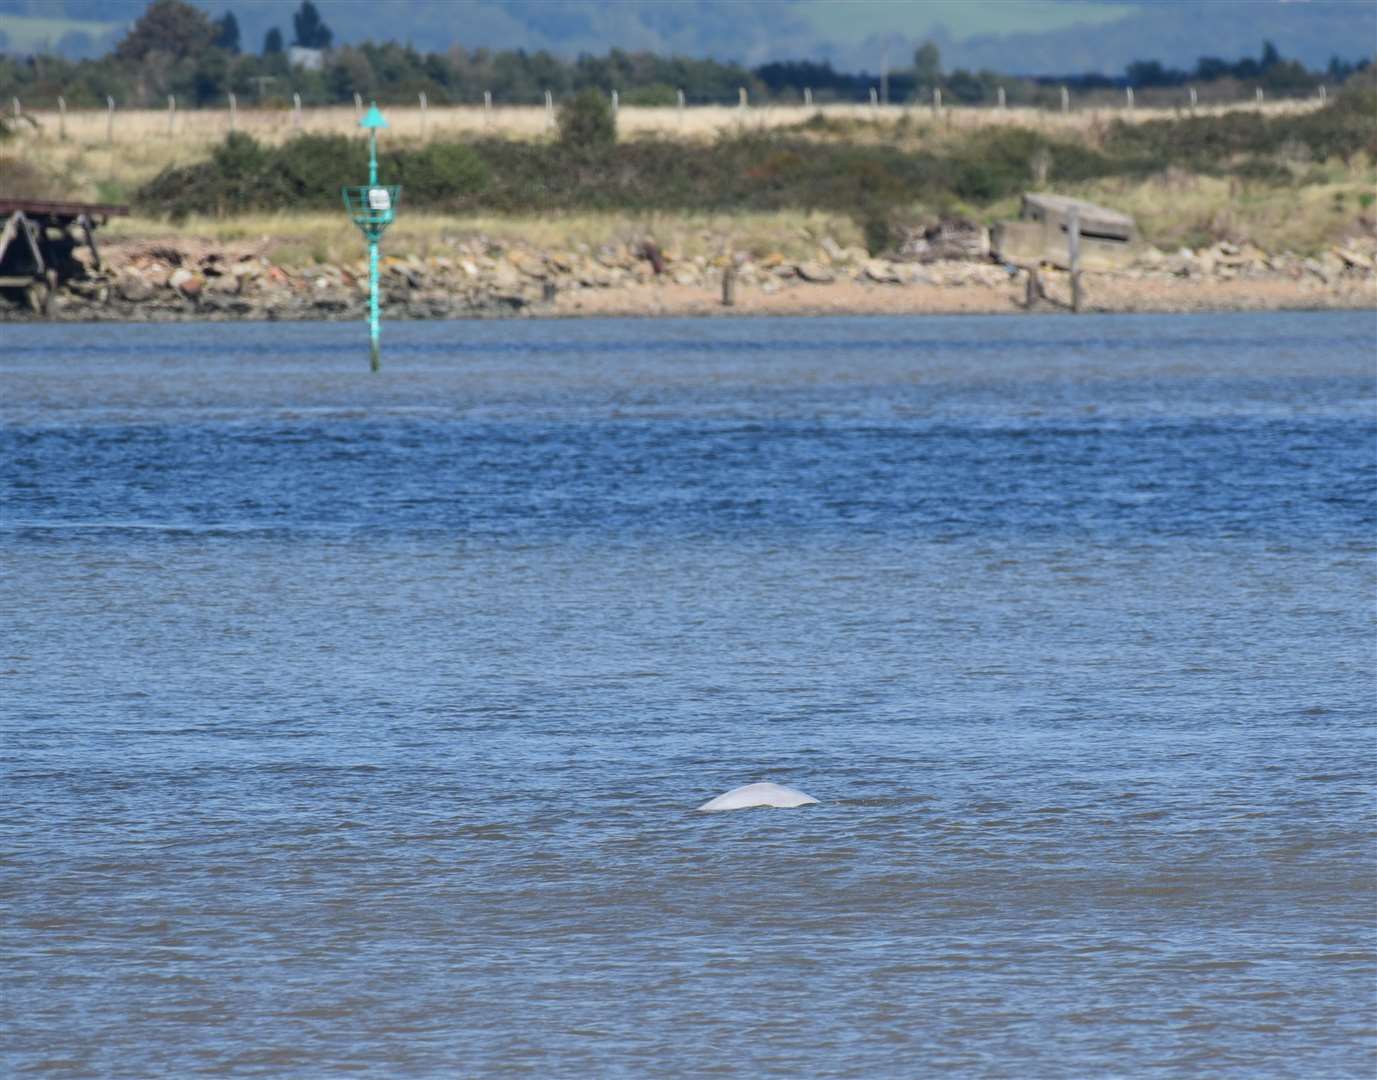 The Beluga poked its head out of the water on multiple occasions. Picture Fraser Gray